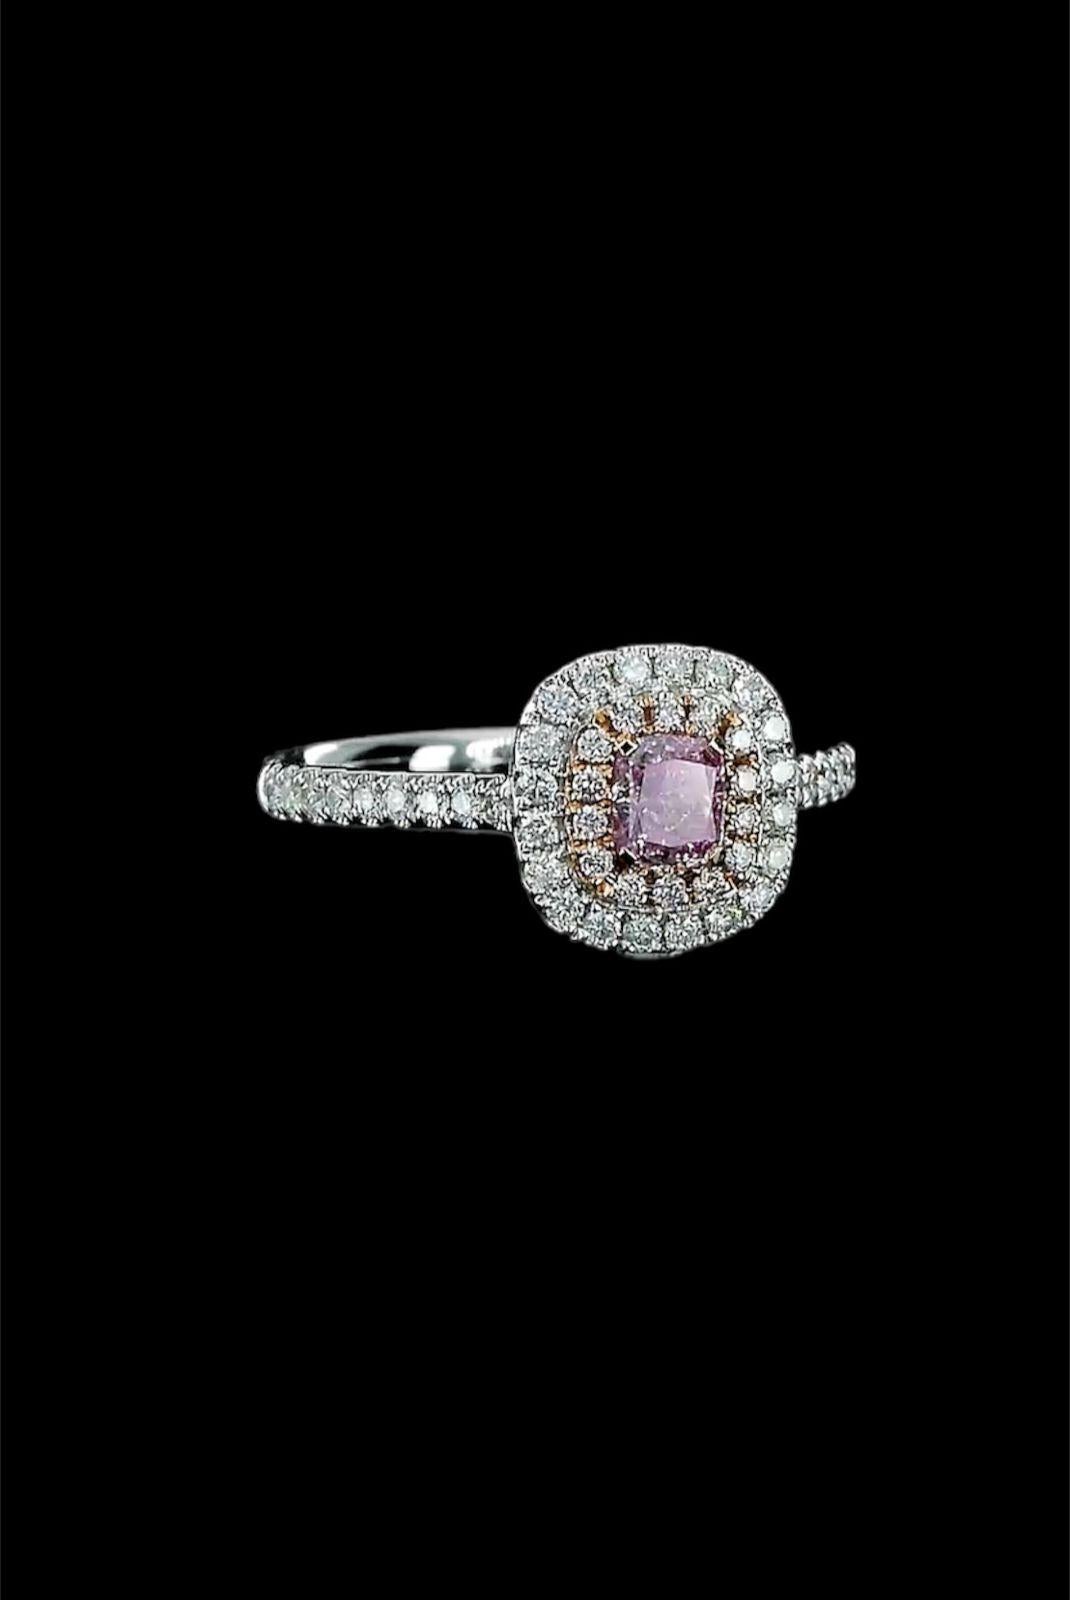 Cushion Cut GIA Certified 0.33 Carat Faint Pink Diamond Ring SI2 Clarity For Sale